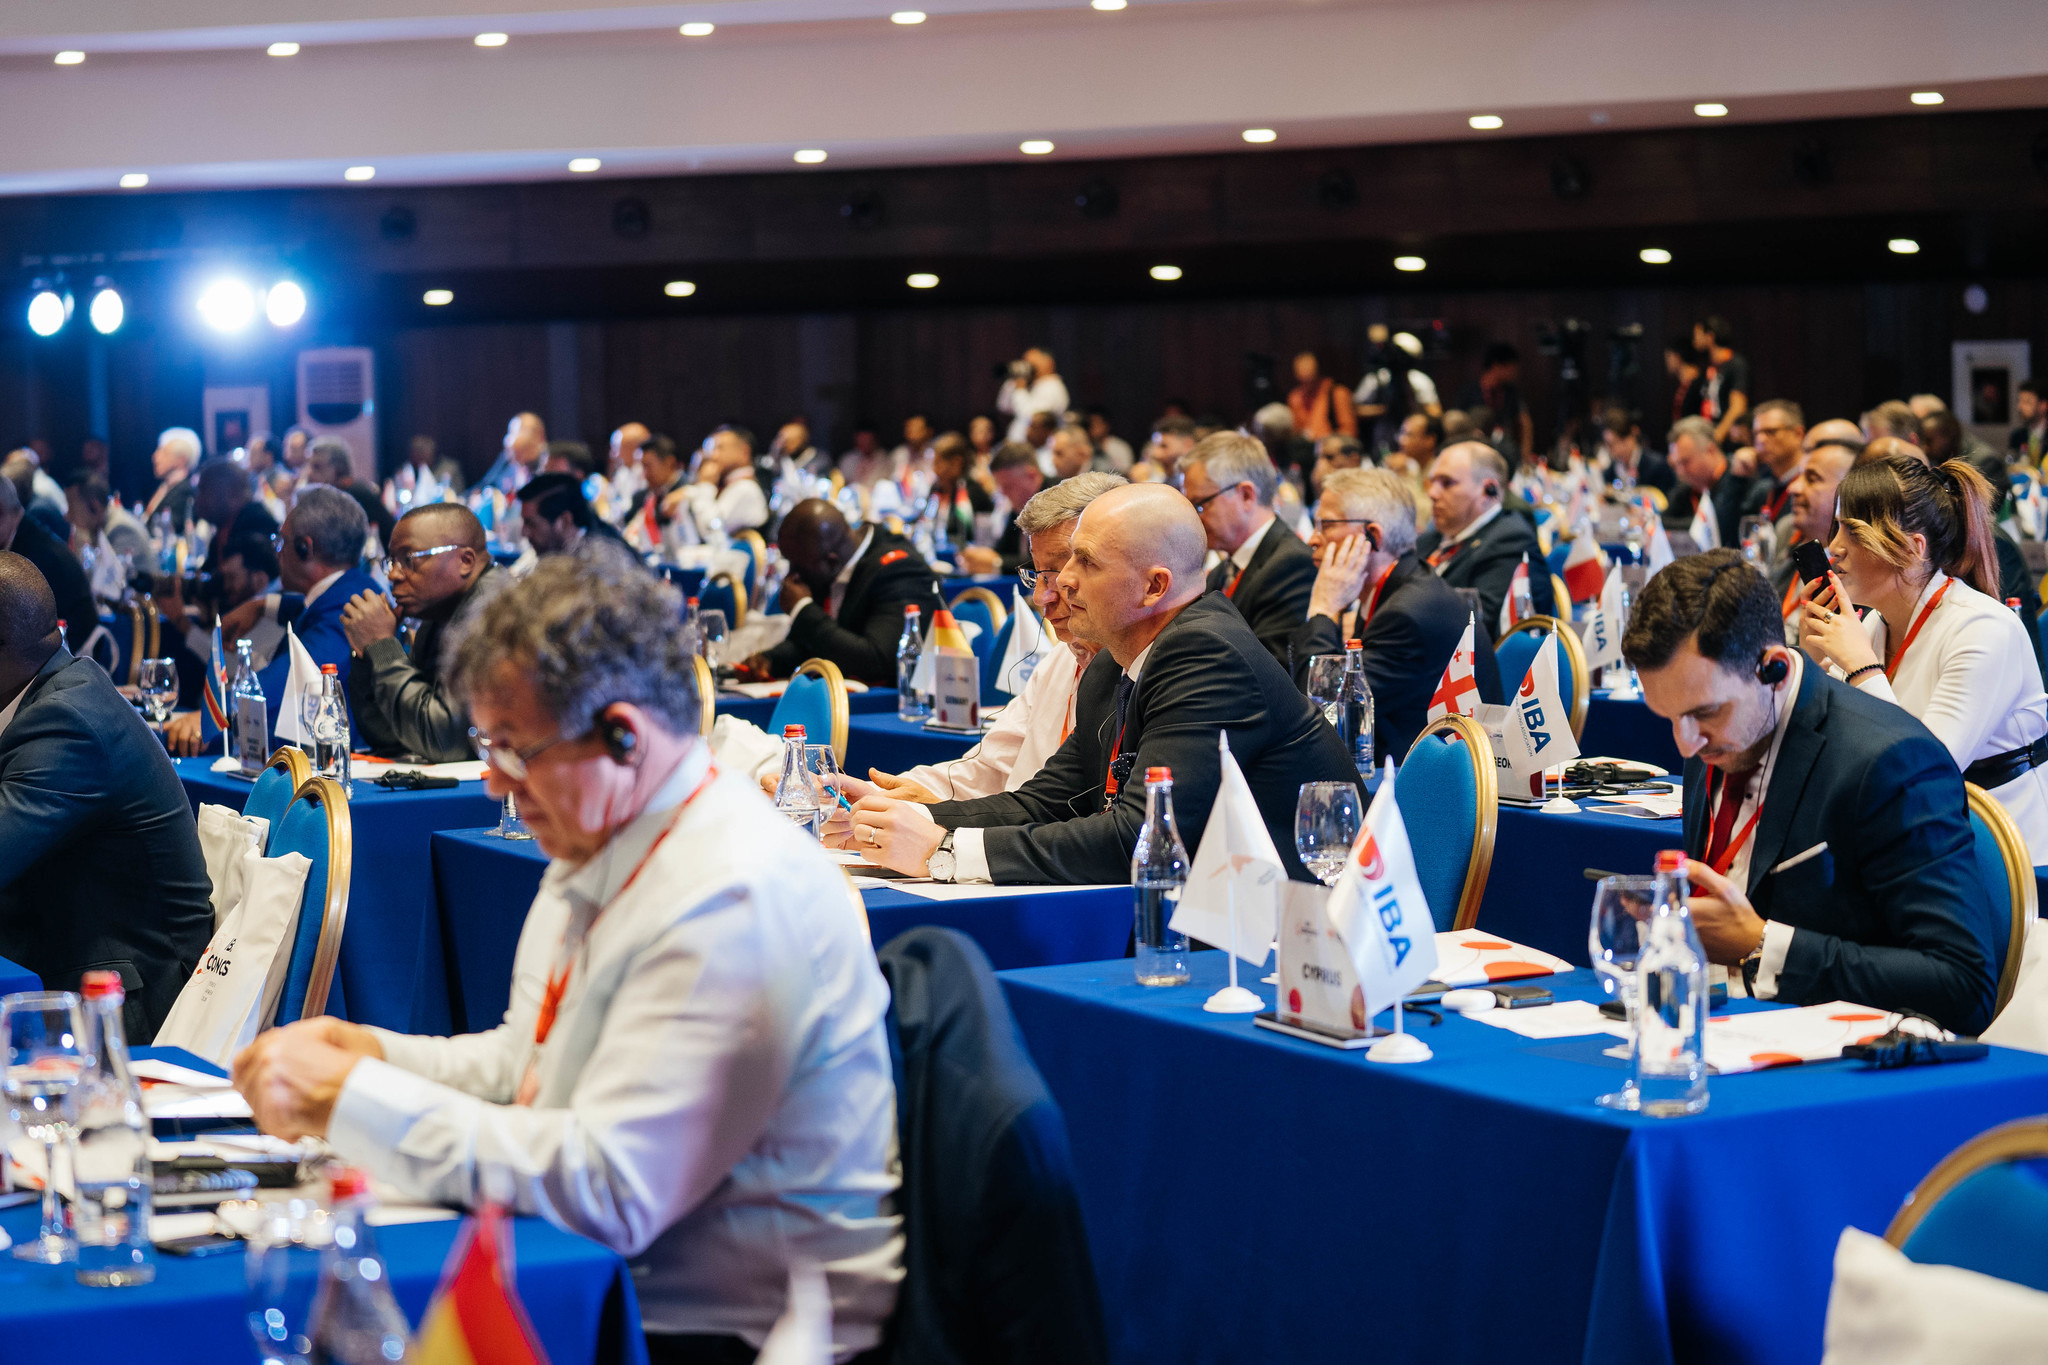 The IBA Extraordinary Congress was attended by delegates both in-person in Yerevan and virtually, with an increase in National Federations present following the power cut ©IBA